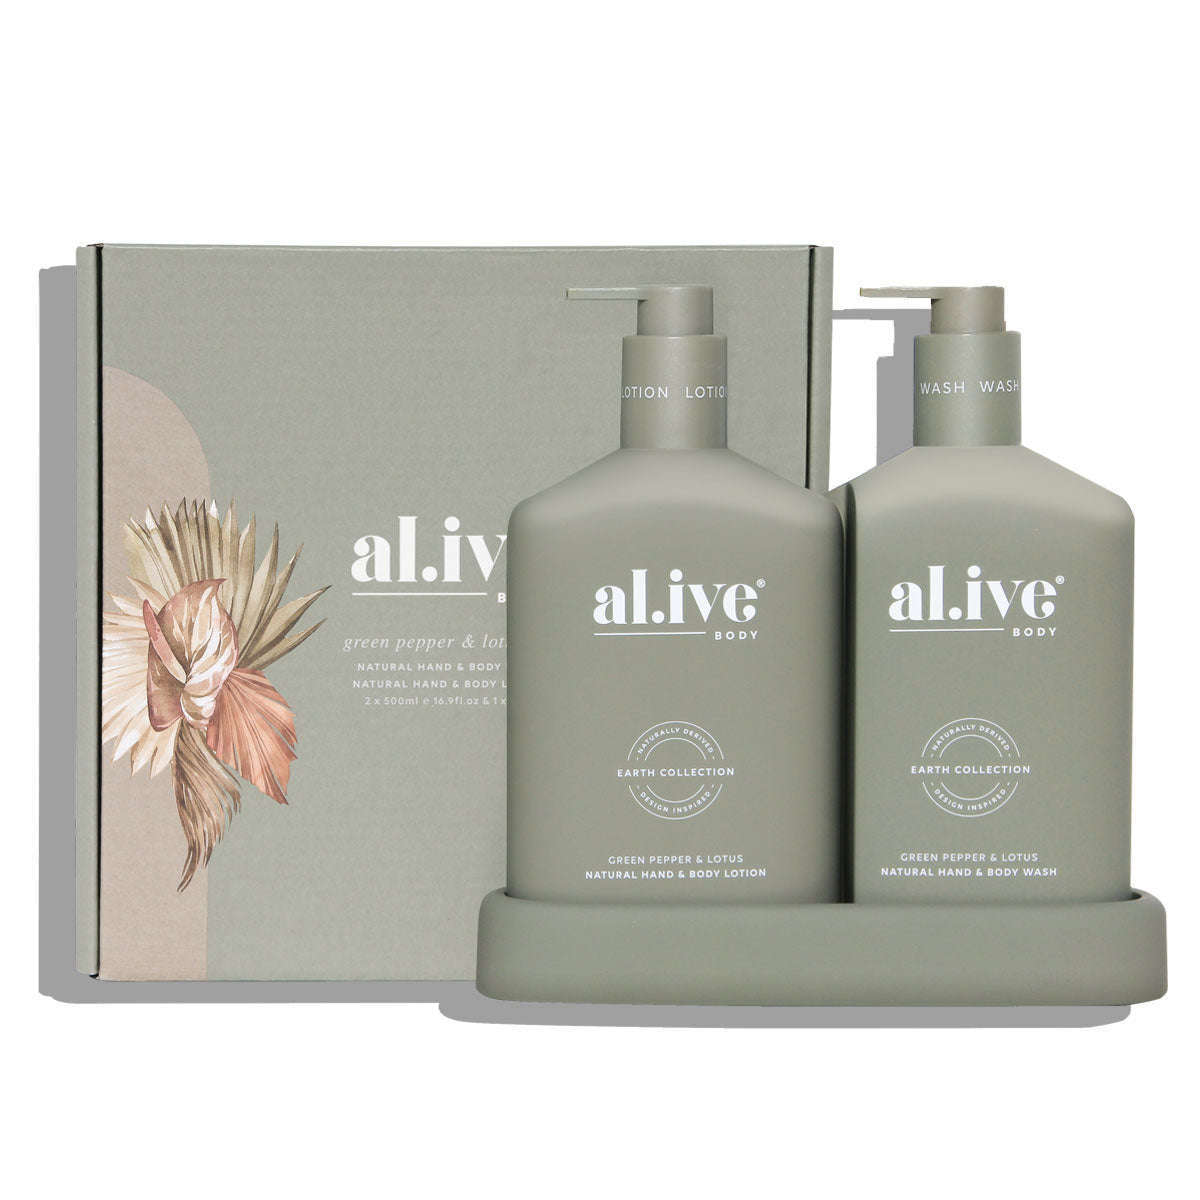 Impodimo Living & Giving:Green Pepper & Lotus Duo:Alive Body